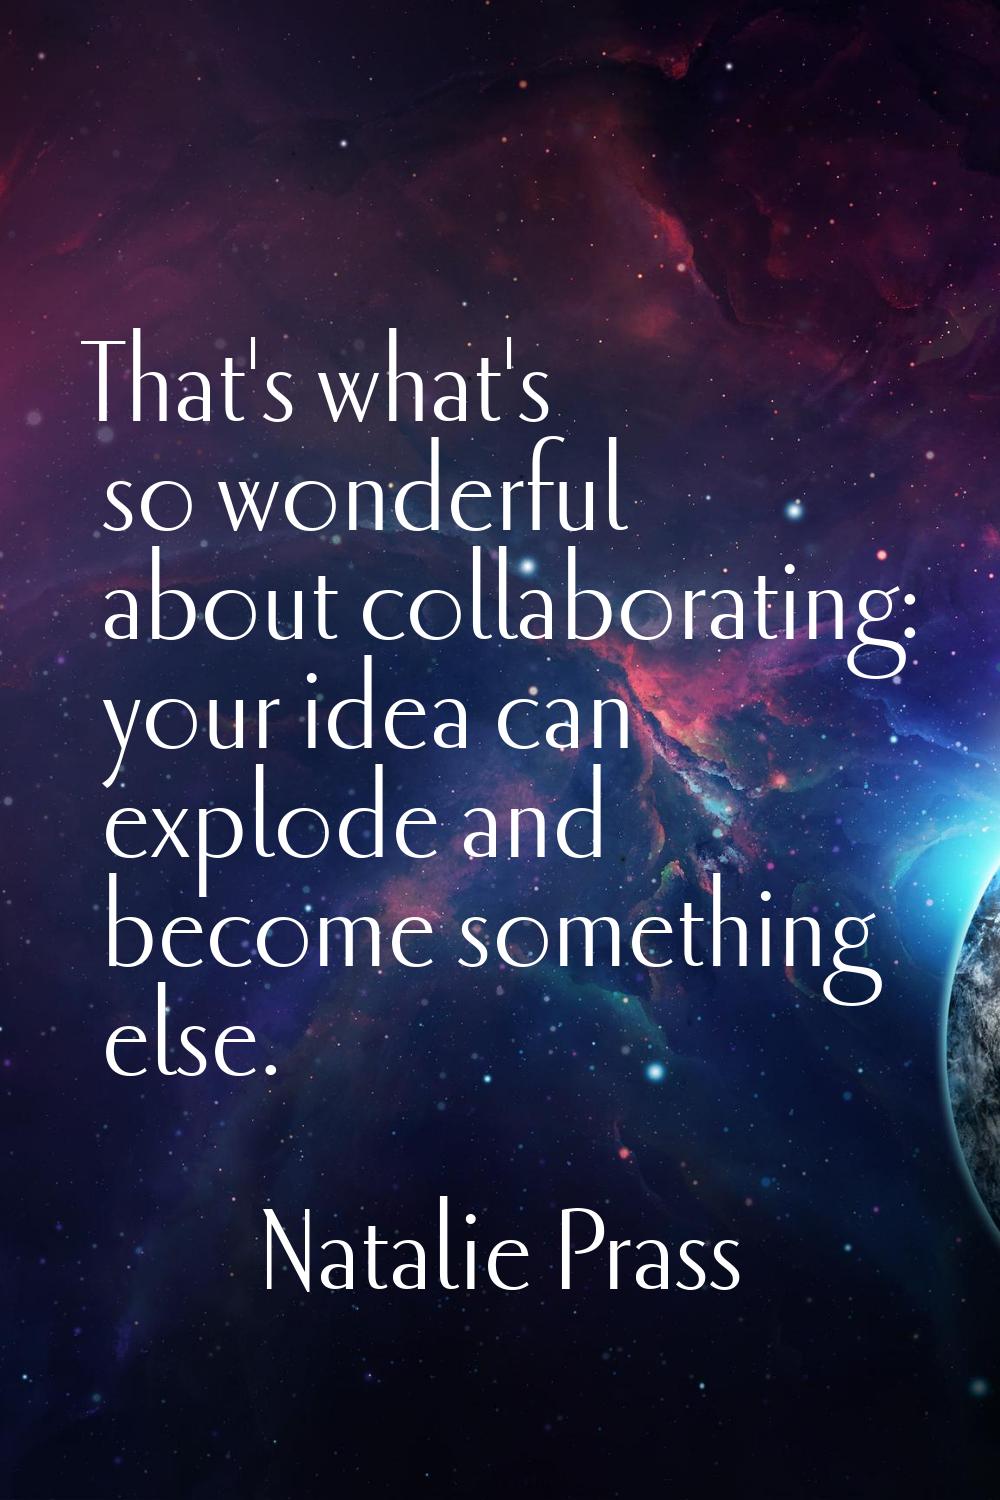 That's what's so wonderful about collaborating: your idea can explode and become something else.